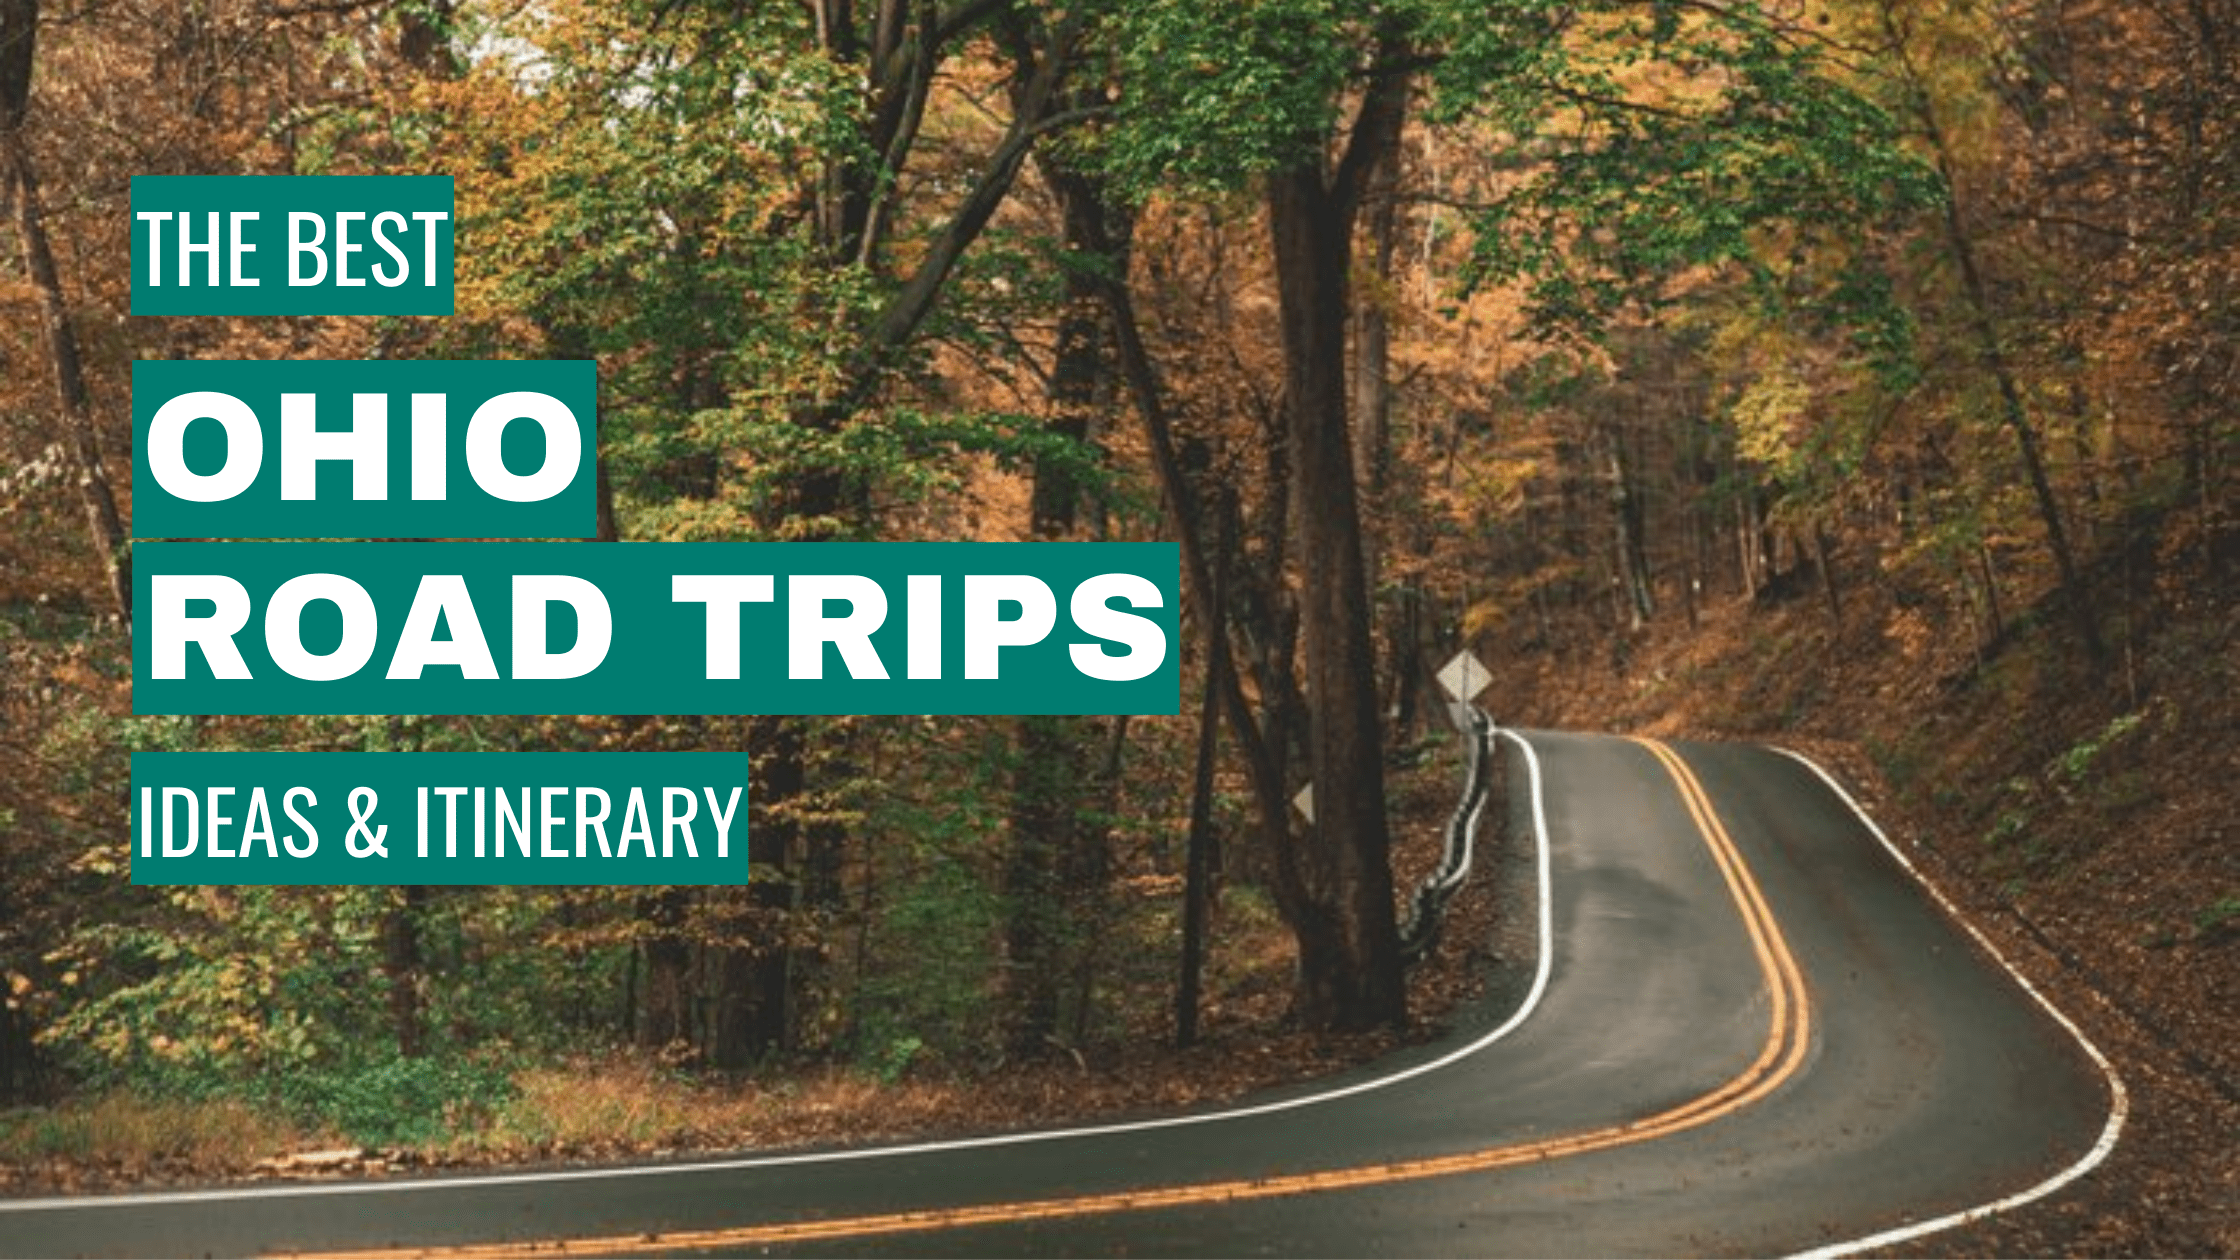 Ohio Road Trip Ideas: 10 Best Road Trips + Itinerary